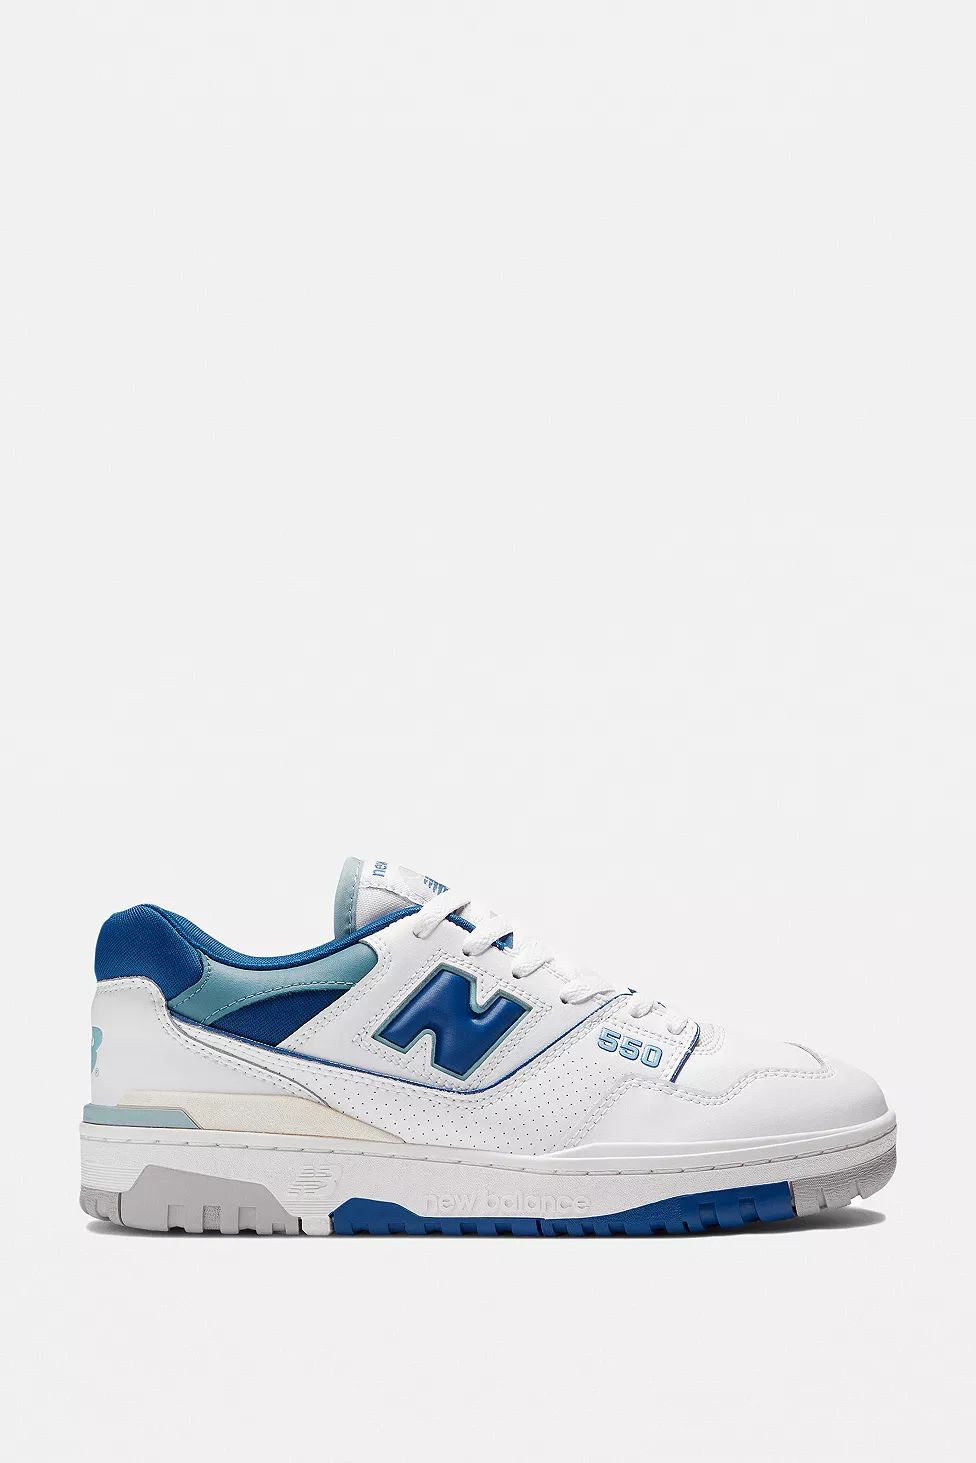 New Balance BB550 White & Sky Blue Trainers | Urban Outfitters (EU)